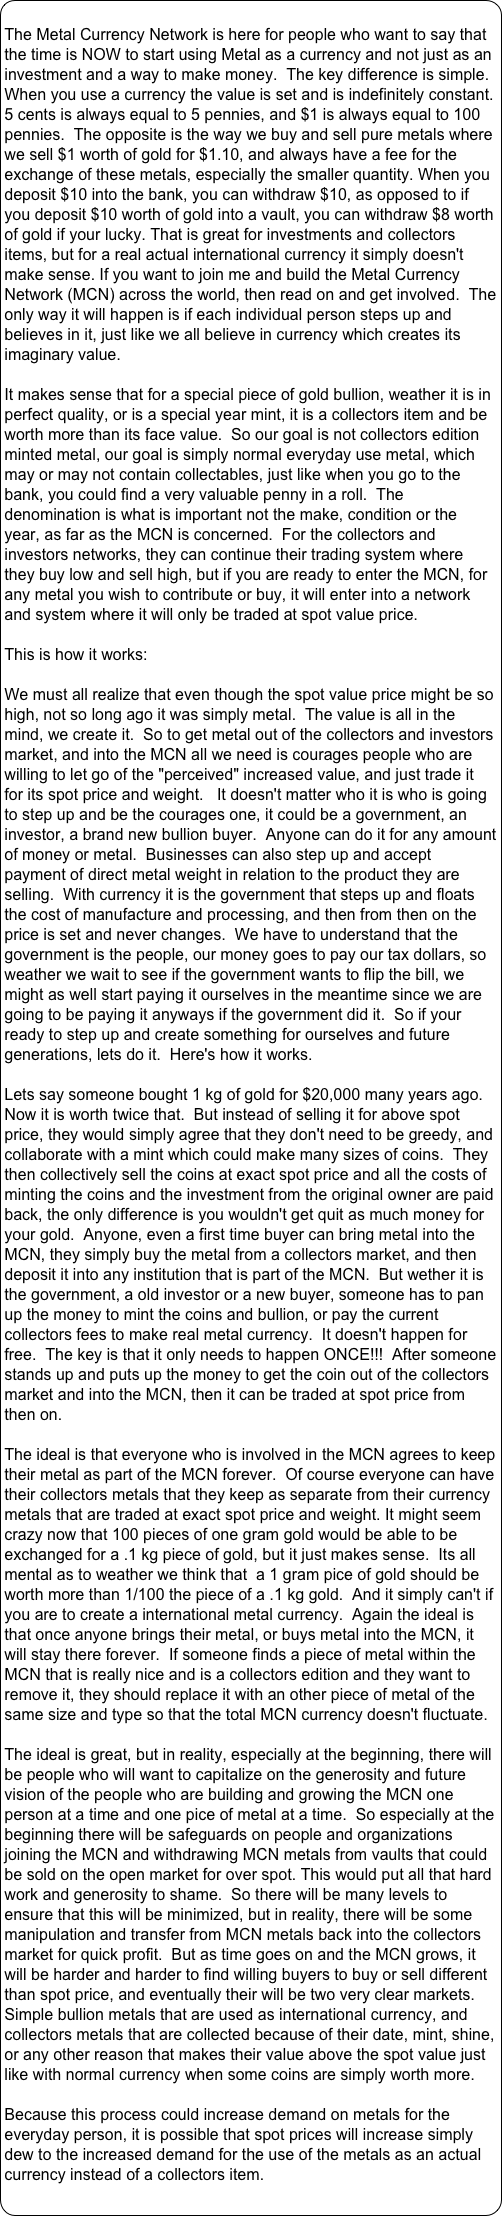 
The Metal Currency Network is here for people who want to say that the time is NOW to start using Metal as a currency and not just as an investment and a way to make money.  The key difference is simple.  When you use a currency the value is set and is indefinitely constant.  5 cents is always equal to 5 pennies, and $1 is always equal to 100 pennies.  The opposite is the way we buy and sell pure metals where we sell $1 worth of gold for $1.10, and always have a fee for the exchange of these metals, especially the smaller quantity. When you deposit $10 into the bank, you can withdraw $10, as opposed to if you deposit $10 worth of gold into a vault, you can withdraw $8 worth of gold if your lucky. That is great for investments and collectors items, but for a real actual international currency it simply doesn't make sense. If you want to join me and build the Metal Currency Network (MCN) across the world, then read on and get involved.  The only way it will happen is if each individual person steps up and believes in it, just like we all believe in currency which creates its imaginary value.

It makes sense that for a special piece of gold bullion, weather it is in perfect quality, or is a special year mint, it is a collectors item and be worth more than its face value.  So our goal is not collectors edition minted metal, our goal is simply normal everyday use metal, which may or may not contain collectables, just like when you go to the bank, you could find a very valuable penny in a roll.  The denomination is what is important not the make, condition or the year, as far as the MCN is concerned.  For the collectors and investors networks, they can continue their trading system where they buy low and sell high, but if you are ready to enter the MCN, for any metal you wish to contribute or buy, it will enter into a network and system where it will only be traded at spot value price.  

This is how it works:

We must all realize that even though the spot value price might be so high, not so long ago it was simply metal.  The value is all in the mind, we create it.  So to get metal out of the collectors and investors market, and into the MCN all we need is courages people who are willing to let go of the "perceived" increased value, and just trade it for its spot price and weight.   It doesn't matter who it is who is going to step up and be the courages one, it could be a government, an investor, a brand new bullion buyer.  Anyone can do it for any amount of money or metal.  Businesses can also step up and accept payment of direct metal weight in relation to the product they are selling.  With currency it is the government that steps up and floats the cost of manufacture and processing, and then from then on the price is set and never changes.  We have to understand that the government is the people, our money goes to pay our tax dollars, so weather we wait to see if the government wants to flip the bill, we might as well start paying it ourselves in the meantime since we are going to be paying it anyways if the government did it.  So if your ready to step up and create something for ourselves and future generations, lets do it.  Here's how it works.

Lets say someone bought 1 kg of gold for $20,000 many years ago.  Now it is worth twice that.  But instead of selling it for above spot price, they would simply agree that they don't need to be greedy, and collaborate with a mint which could make many sizes of coins.  They then collectively sell the coins at exact spot price and all the costs of minting the coins and the investment from the original owner are paid back, the only difference is you wouldn't get quit as much money for your gold.  Anyone, even a first time buyer can bring metal into the MCN, they simply buy the metal from a collectors market, and then deposit it into any institution that is part of the MCN.  But wether it is the government, a old investor or a new buyer, someone has to pan up the money to mint the coins and bullion, or pay the current collectors fees to make real metal currency.  It doesn't happen for free.  The key is that it only needs to happen ONCE!!!  After someone stands up and puts up the money to get the coin out of the collectors market and into the MCN, then it can be traded at spot price from then on.

The ideal is that everyone who is involved in the MCN agrees to keep their metal as part of the MCN forever.  Of course everyone can have their collectors metals that they keep as separate from their currency metals that are traded at exact spot price and weight. It might seem crazy now that 100 pieces of one gram gold would be able to be exchanged for a .1 kg piece of gold, but it just makes sense.  Its all mental as to weather we think that  a 1 gram pice of gold should be worth more than 1/100 the piece of a .1 kg gold.  And it simply can't if you are to create a international metal currency.  Again the ideal is that once anyone brings their metal, or buys metal into the MCN, it will stay there forever.  If someone finds a piece of metal within the MCN that is really nice and is a collectors edition and they want to remove it, they should replace it with an other piece of metal of the same size and type so that the total MCN currency doesn't fluctuate.

The ideal is great, but in reality, especially at the beginning, there will be people who will want to capitalize on the generosity and future vision of the people who are building and growing the MCN one person at a time and one pice of metal at a time.  So especially at the beginning there will be safeguards on people and organizations joining the MCN and withdrawing MCN metals from vaults that could be sold on the open market for over spot. This would put all that hard work and generosity to shame.  So there will be many levels to ensure that this will be minimized, but in reality, there will be some manipulation and transfer from MCN metals back into the collectors market for quick profit.  But as time goes on and the MCN grows, it will be harder and harder to find willing buyers to buy or sell different than spot price, and eventually their will be two very clear markets.  Simple bullion metals that are used as international currency, and collectors metals that are collected because of their date, mint, shine, or any other reason that makes their value above the spot value just like with normal currency when some coins are simply worth more.  

Because this process could increase demand on metals for the everyday person, it is possible that spot prices will increase simply dew to the increased demand for the use of the metals as an actual currency instead of a collectors item.
